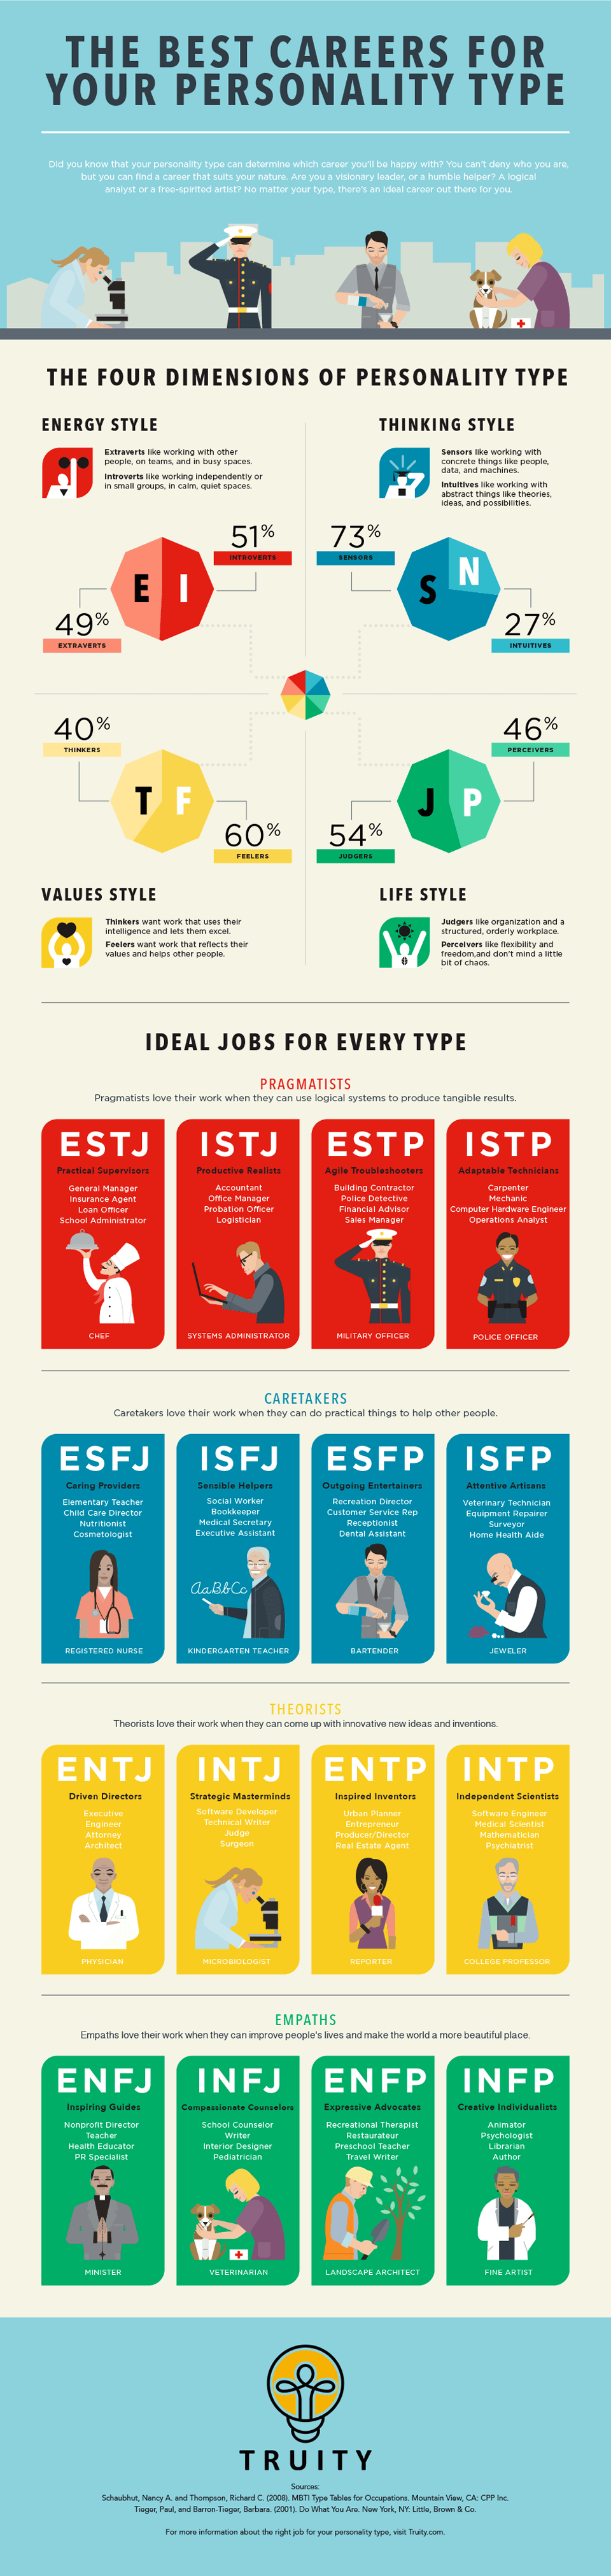 The Best Career for Your Personality Type Infographic